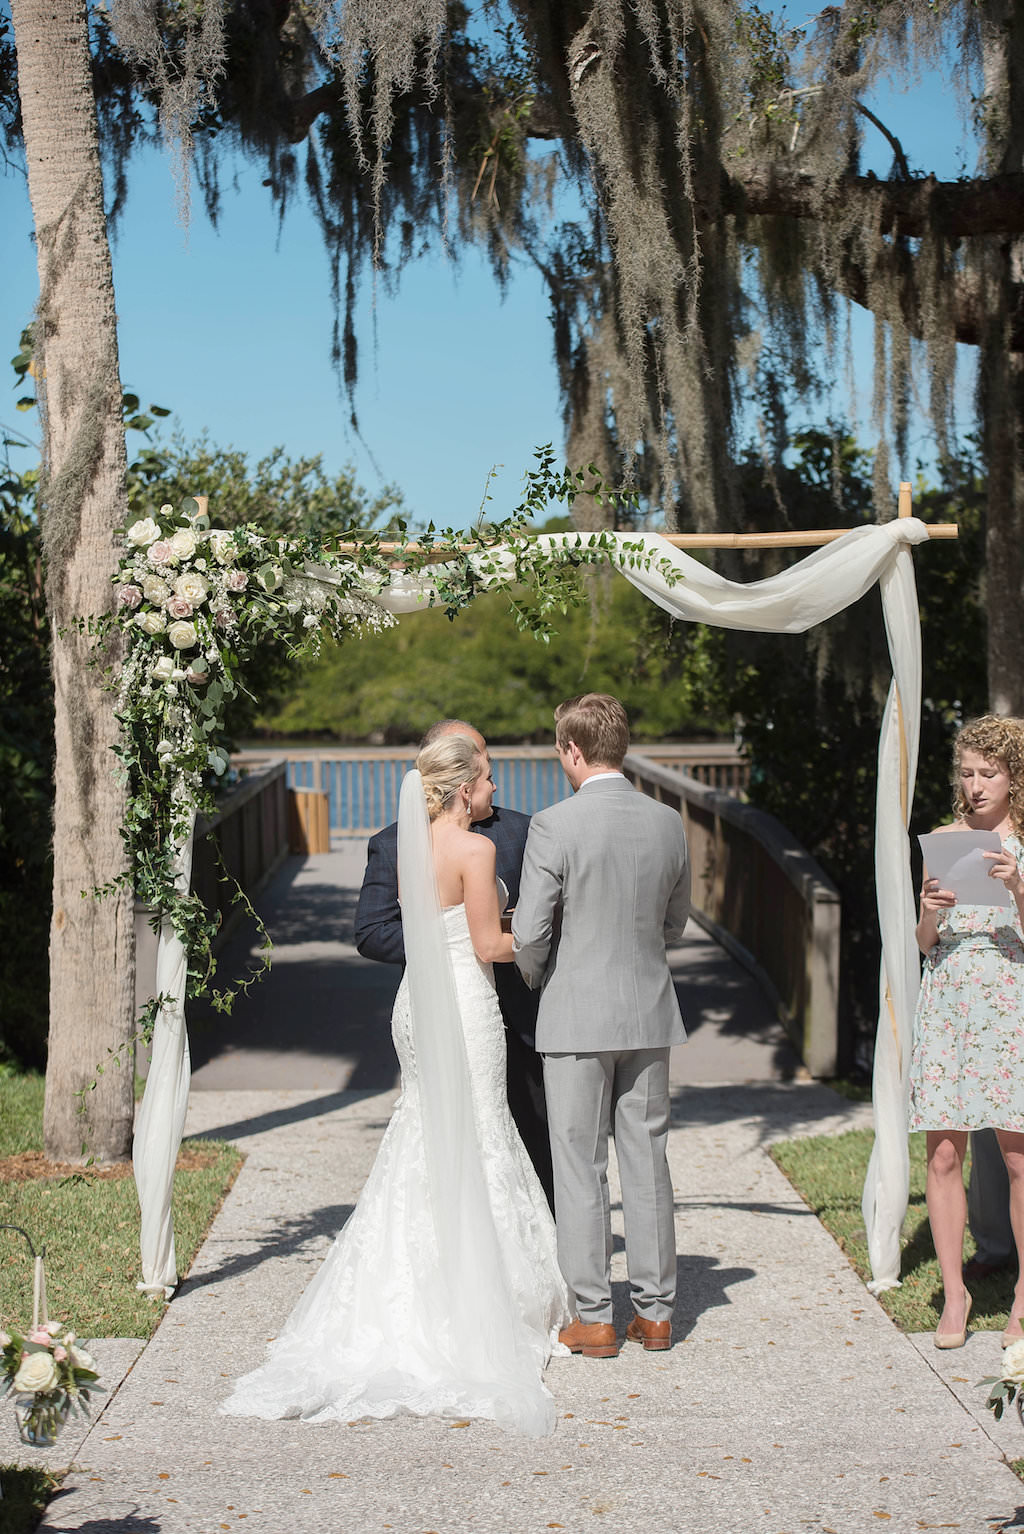 Outdoor Waterfront Garden Wedding Ceremony Portrait under white draped Ceremony Arch with White Rose and Natural Greenery Flowers | Sarasota Wedding Photographer Kristen Marie Photography | Historic Venue The Edson Keith Mansion